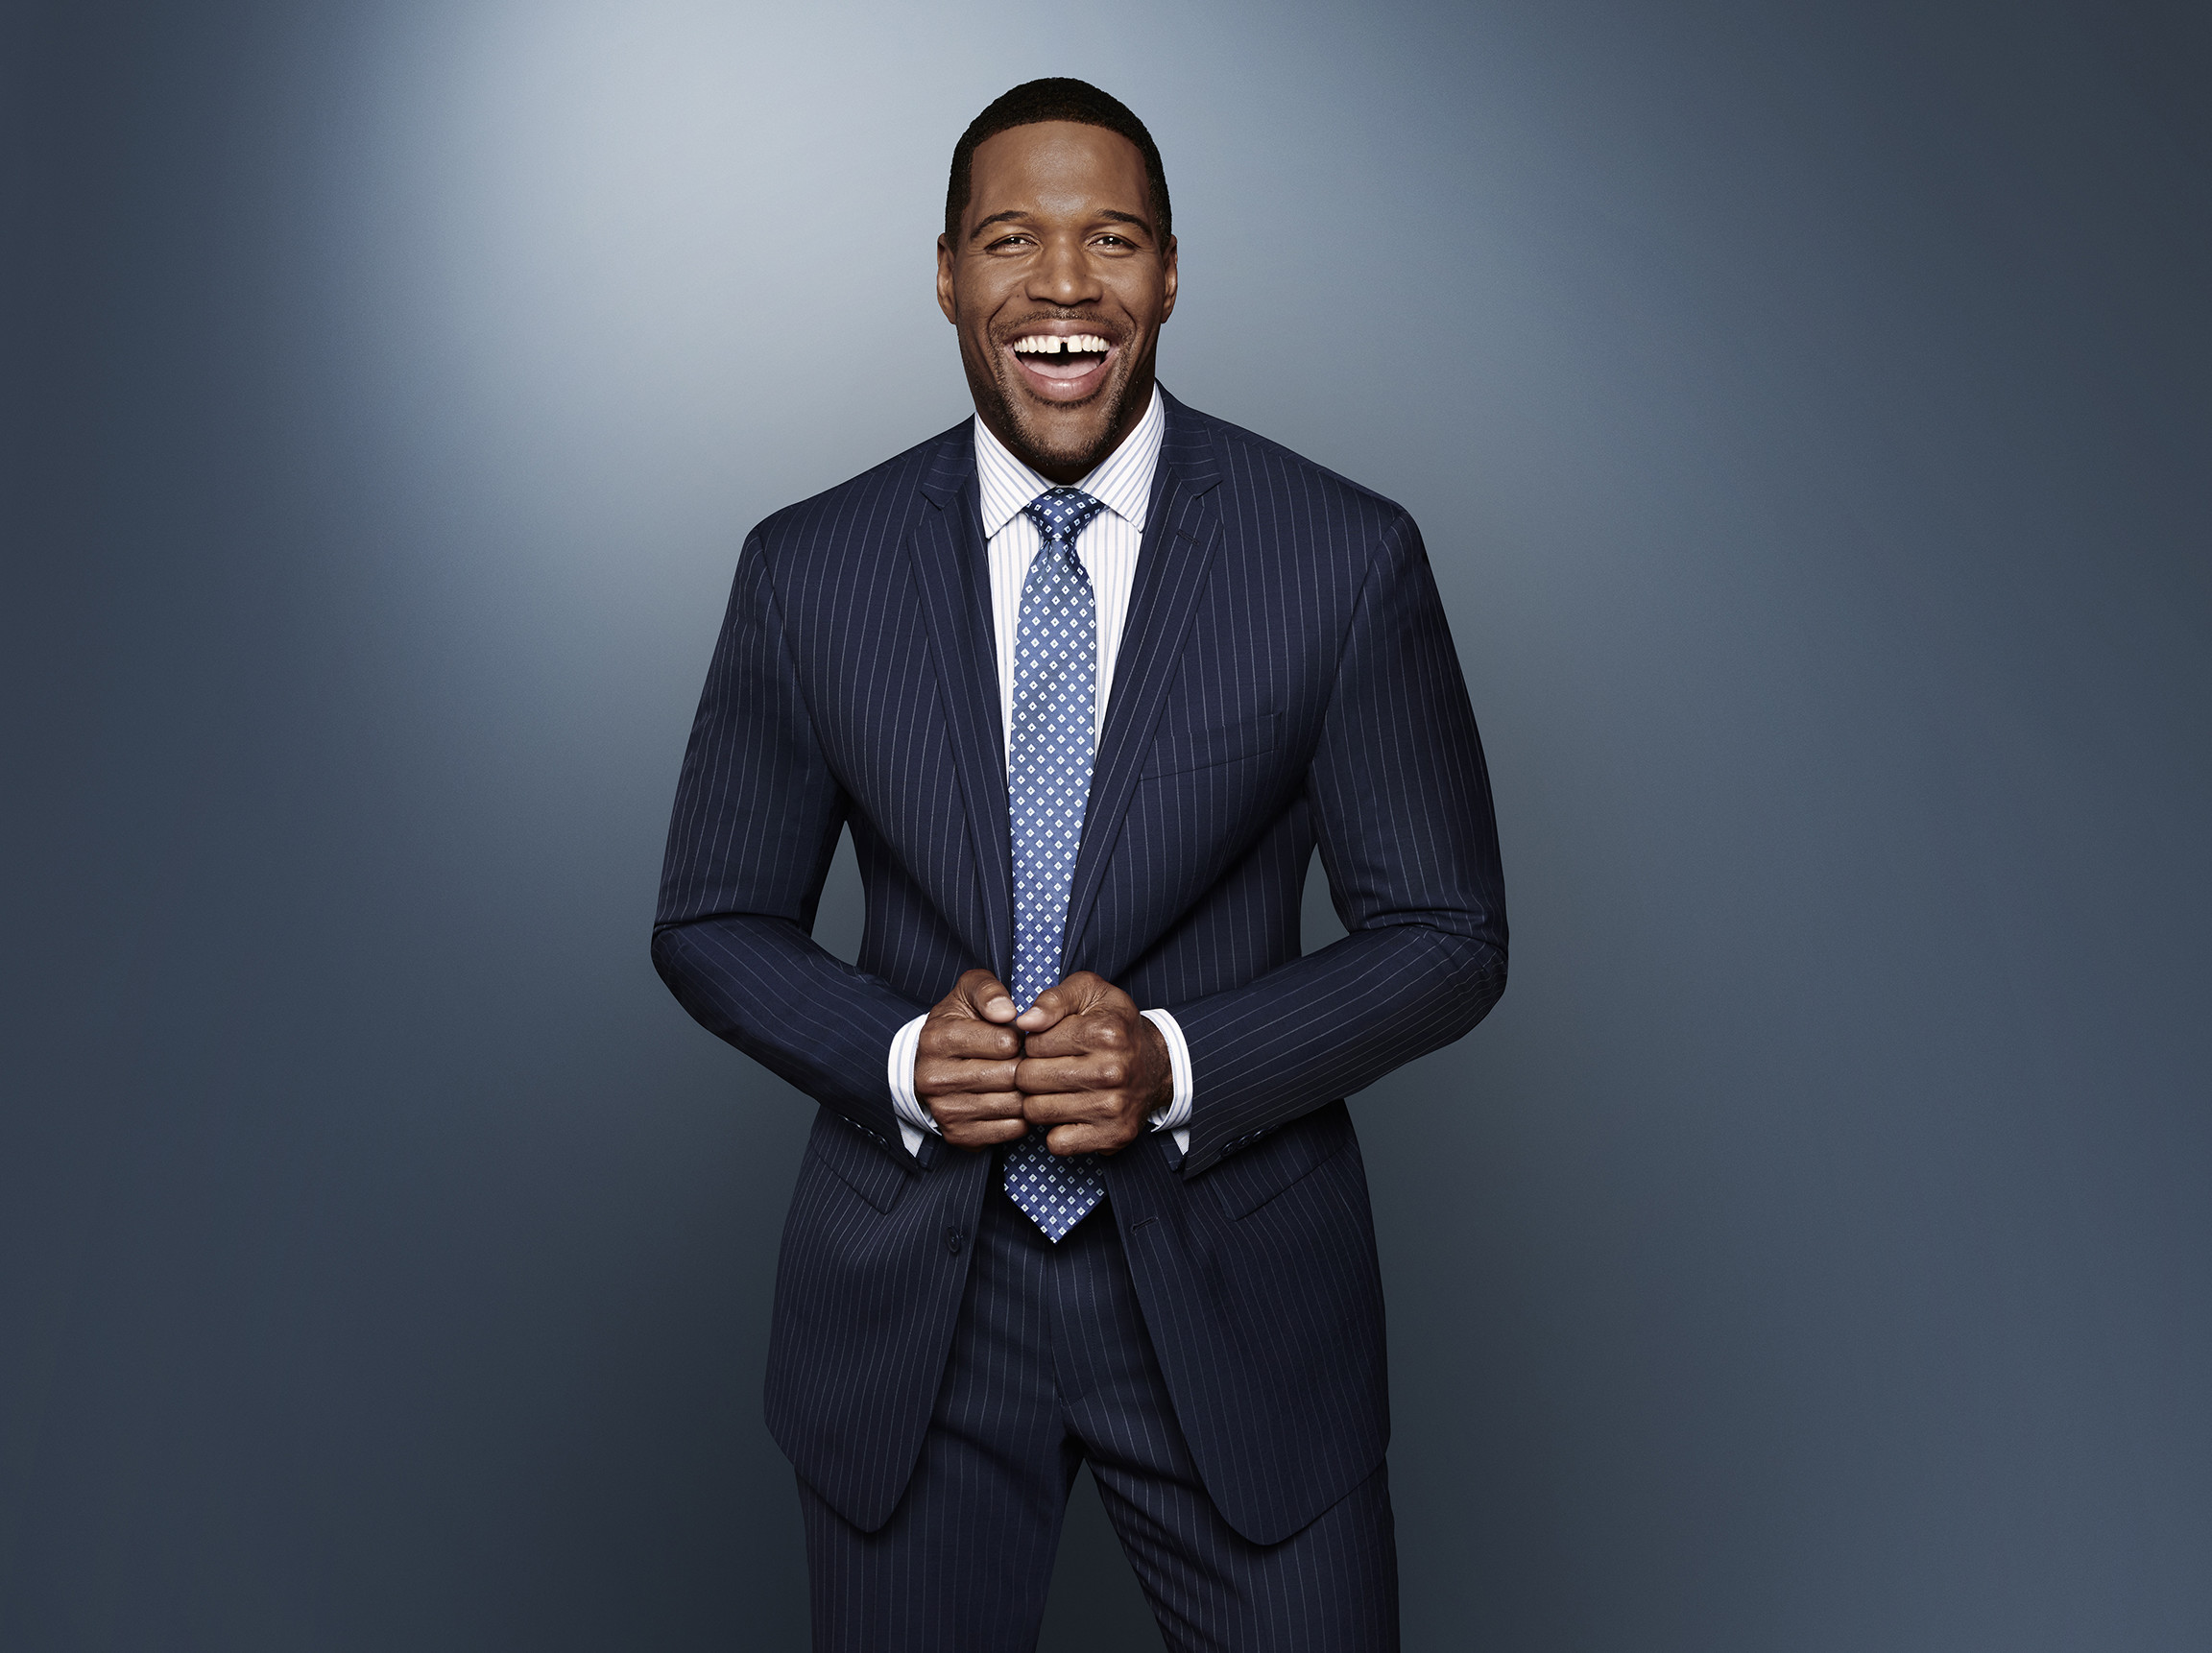 Michael Strahan making Hall of Fame is point of pride for NY